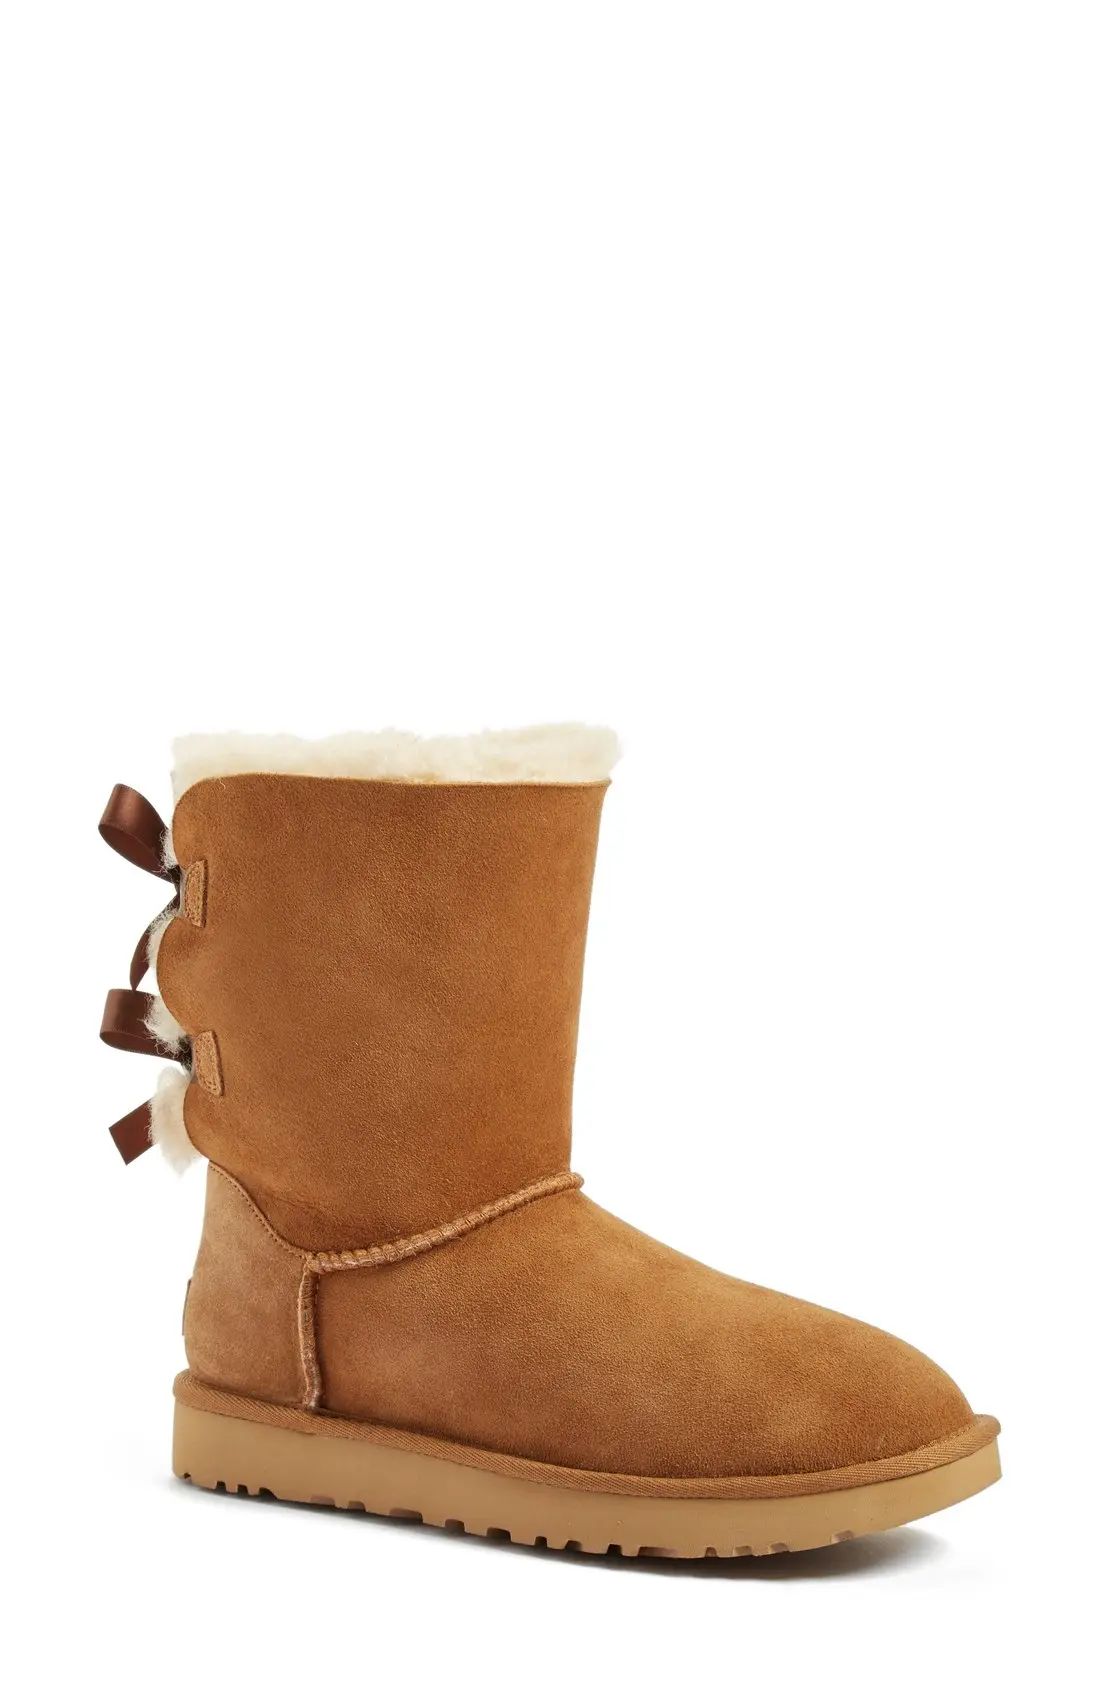 'Bailey Bow II' Boot | Nordstrom